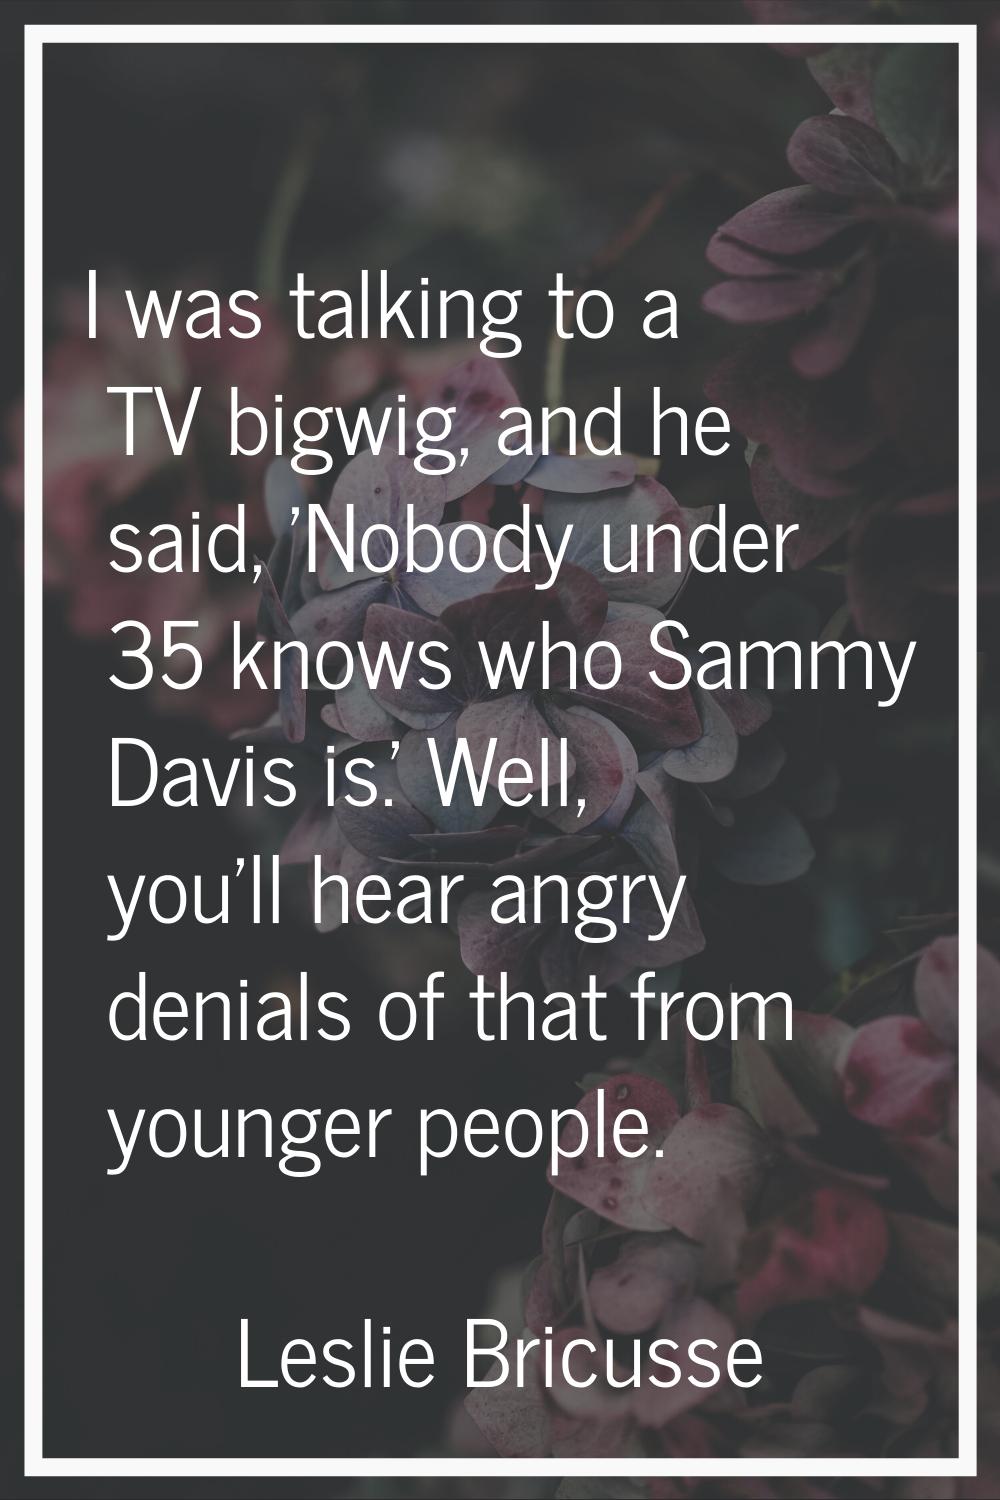 I was talking to a TV bigwig, and he said, 'Nobody under 35 knows who Sammy Davis is.' Well, you'll